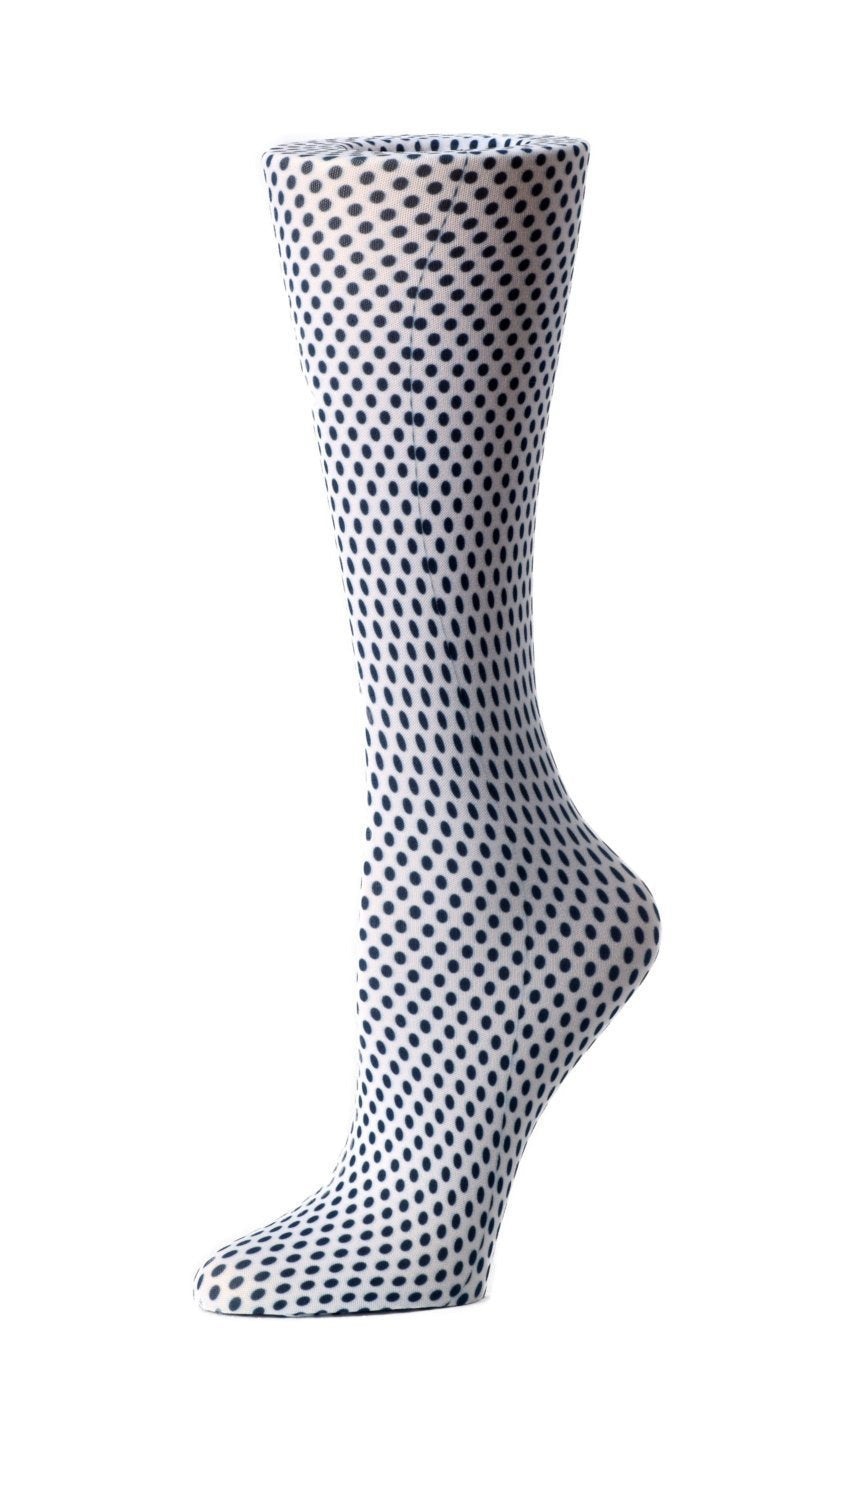 Cutieful Moderate Compression Socks 10-18 MMhg Wide Calf Knit Print Pattern Traditional Polka Dot at Parker's Clothing and Shoes.